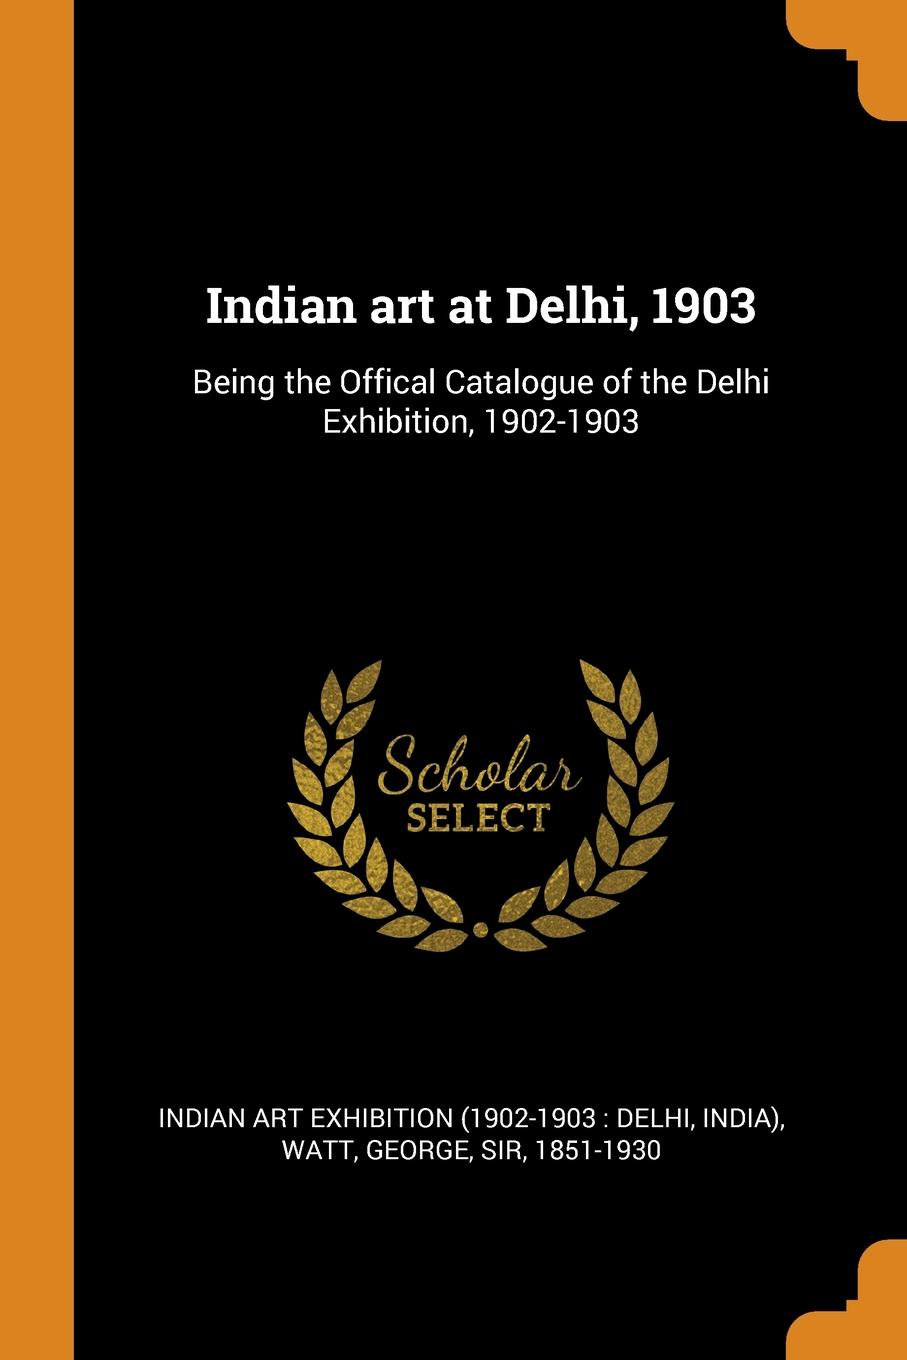 Indian art at Delhi, 1903. Being the Offical Catalogue of the Delhi Exhibition, 1902-1903